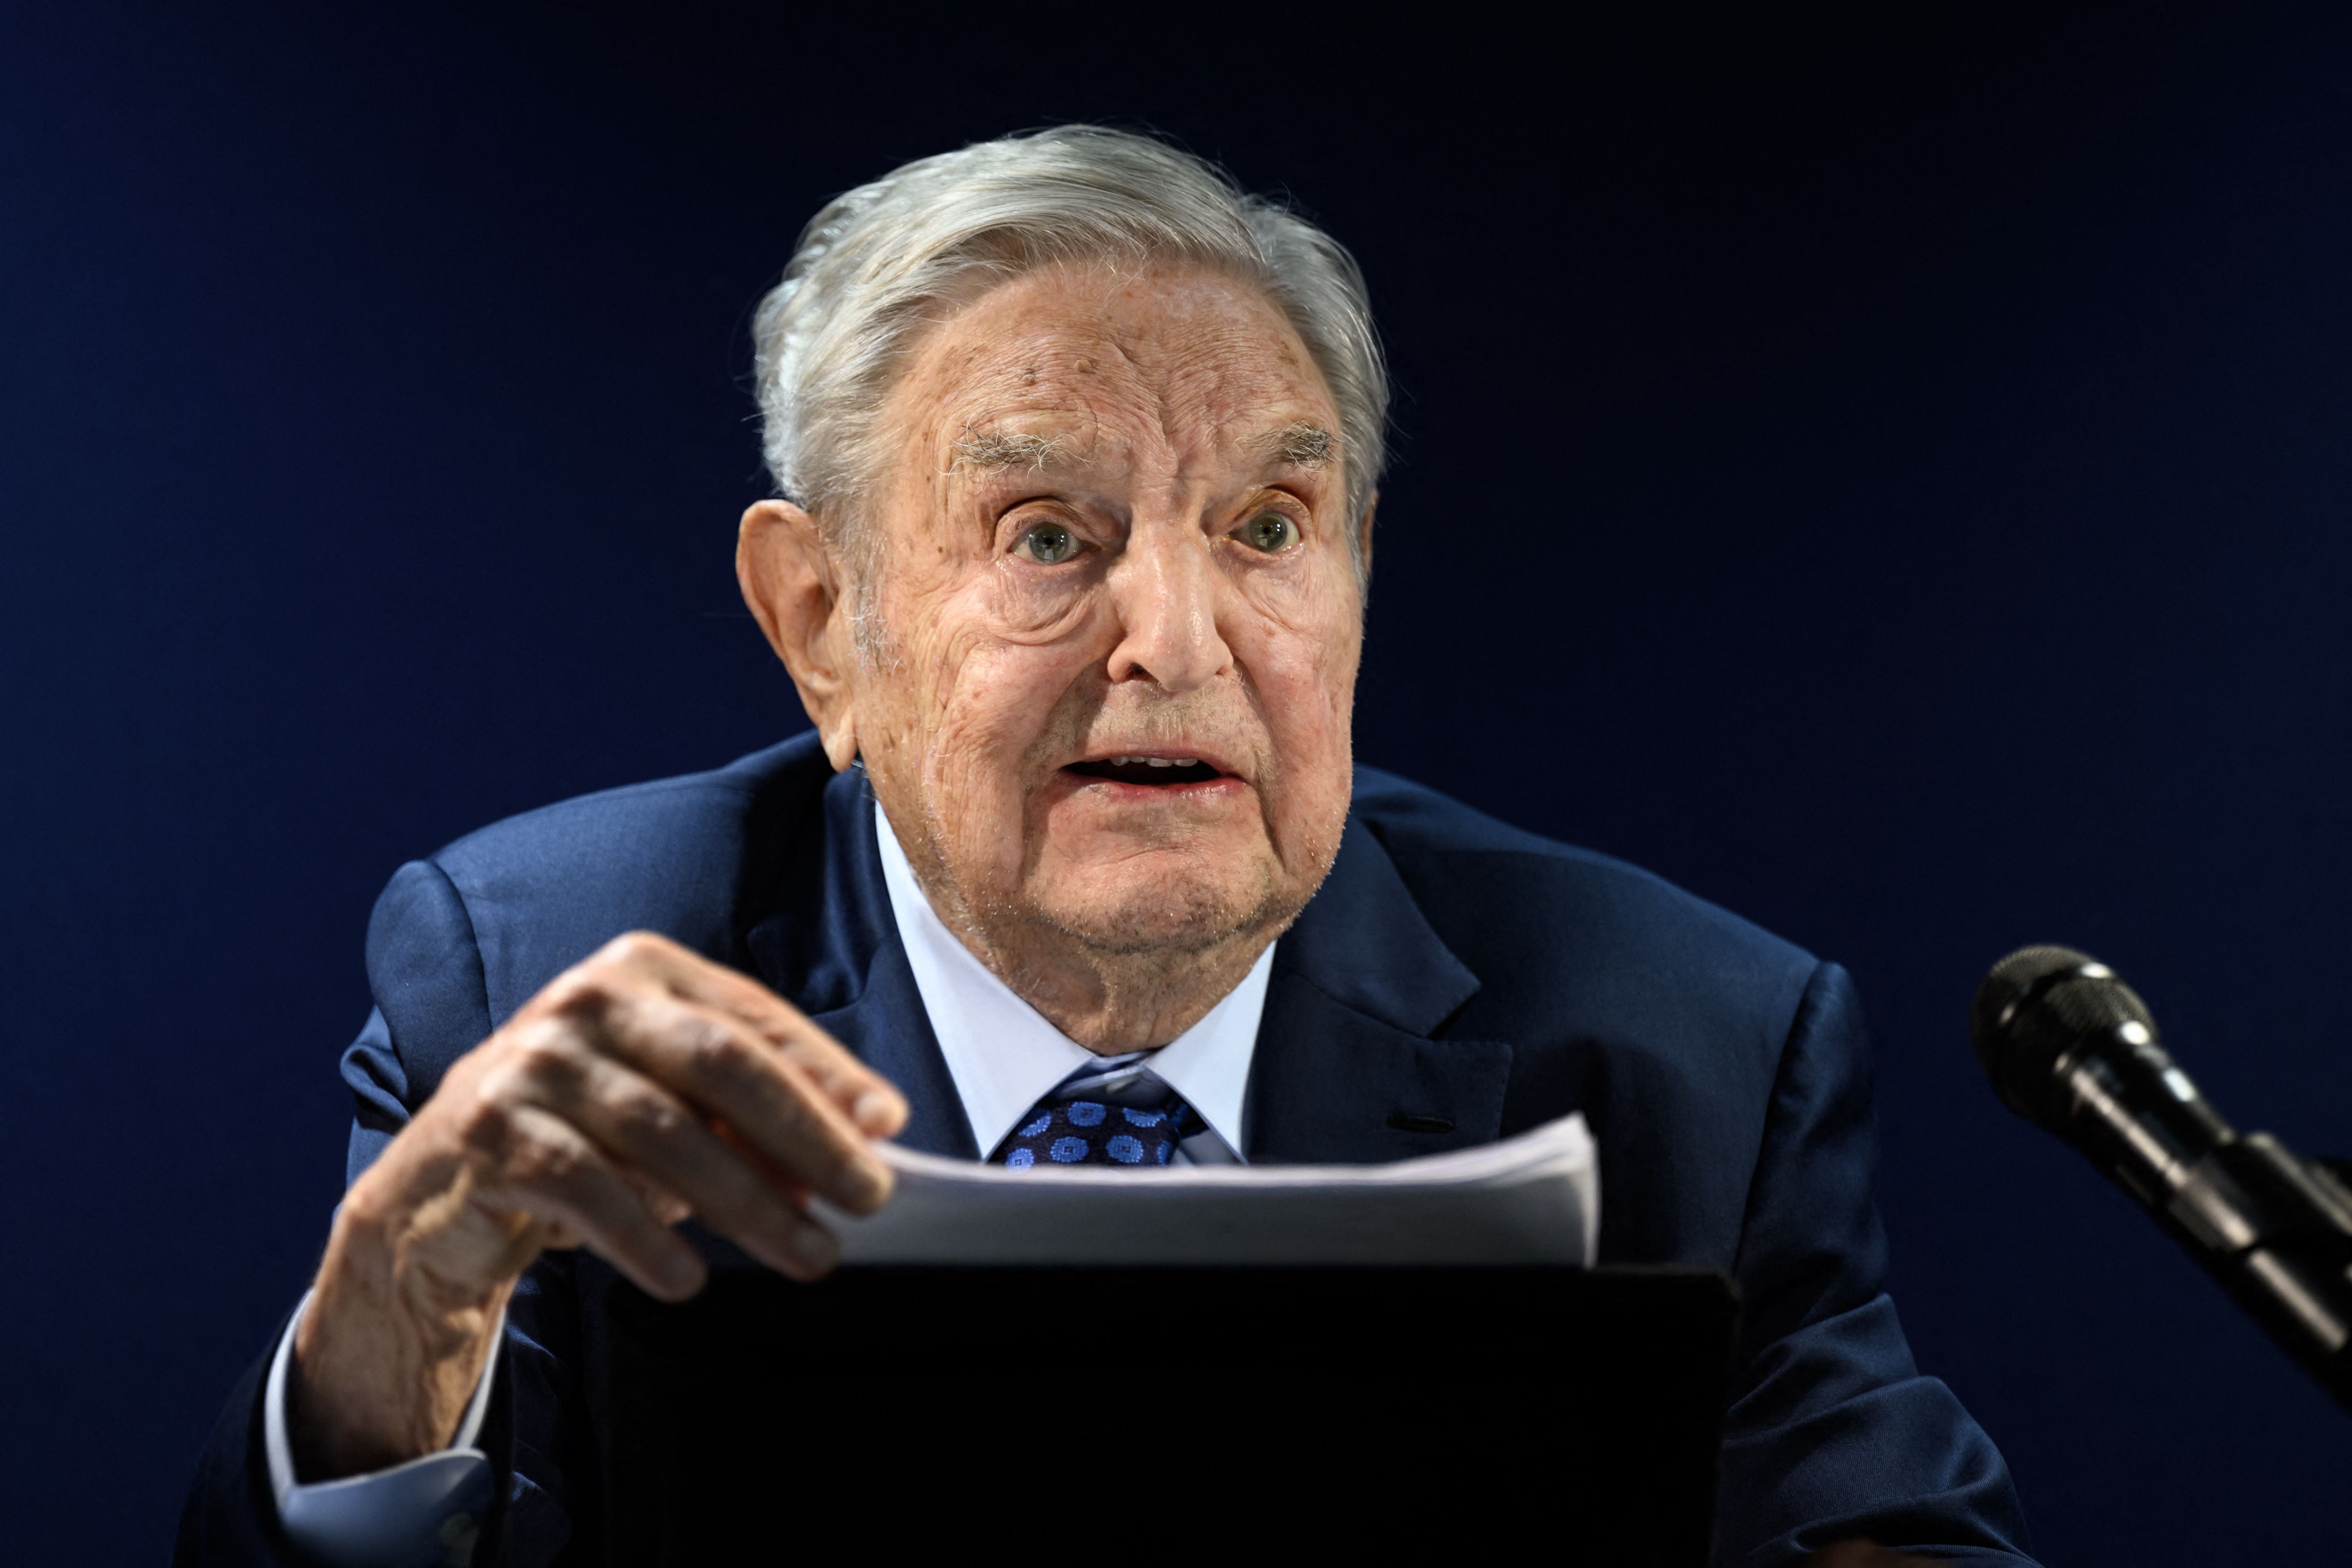 George Soros addresses the assembly on the sidelines of the World Economic Forum (WEF) meeting in Davos on Tuesday